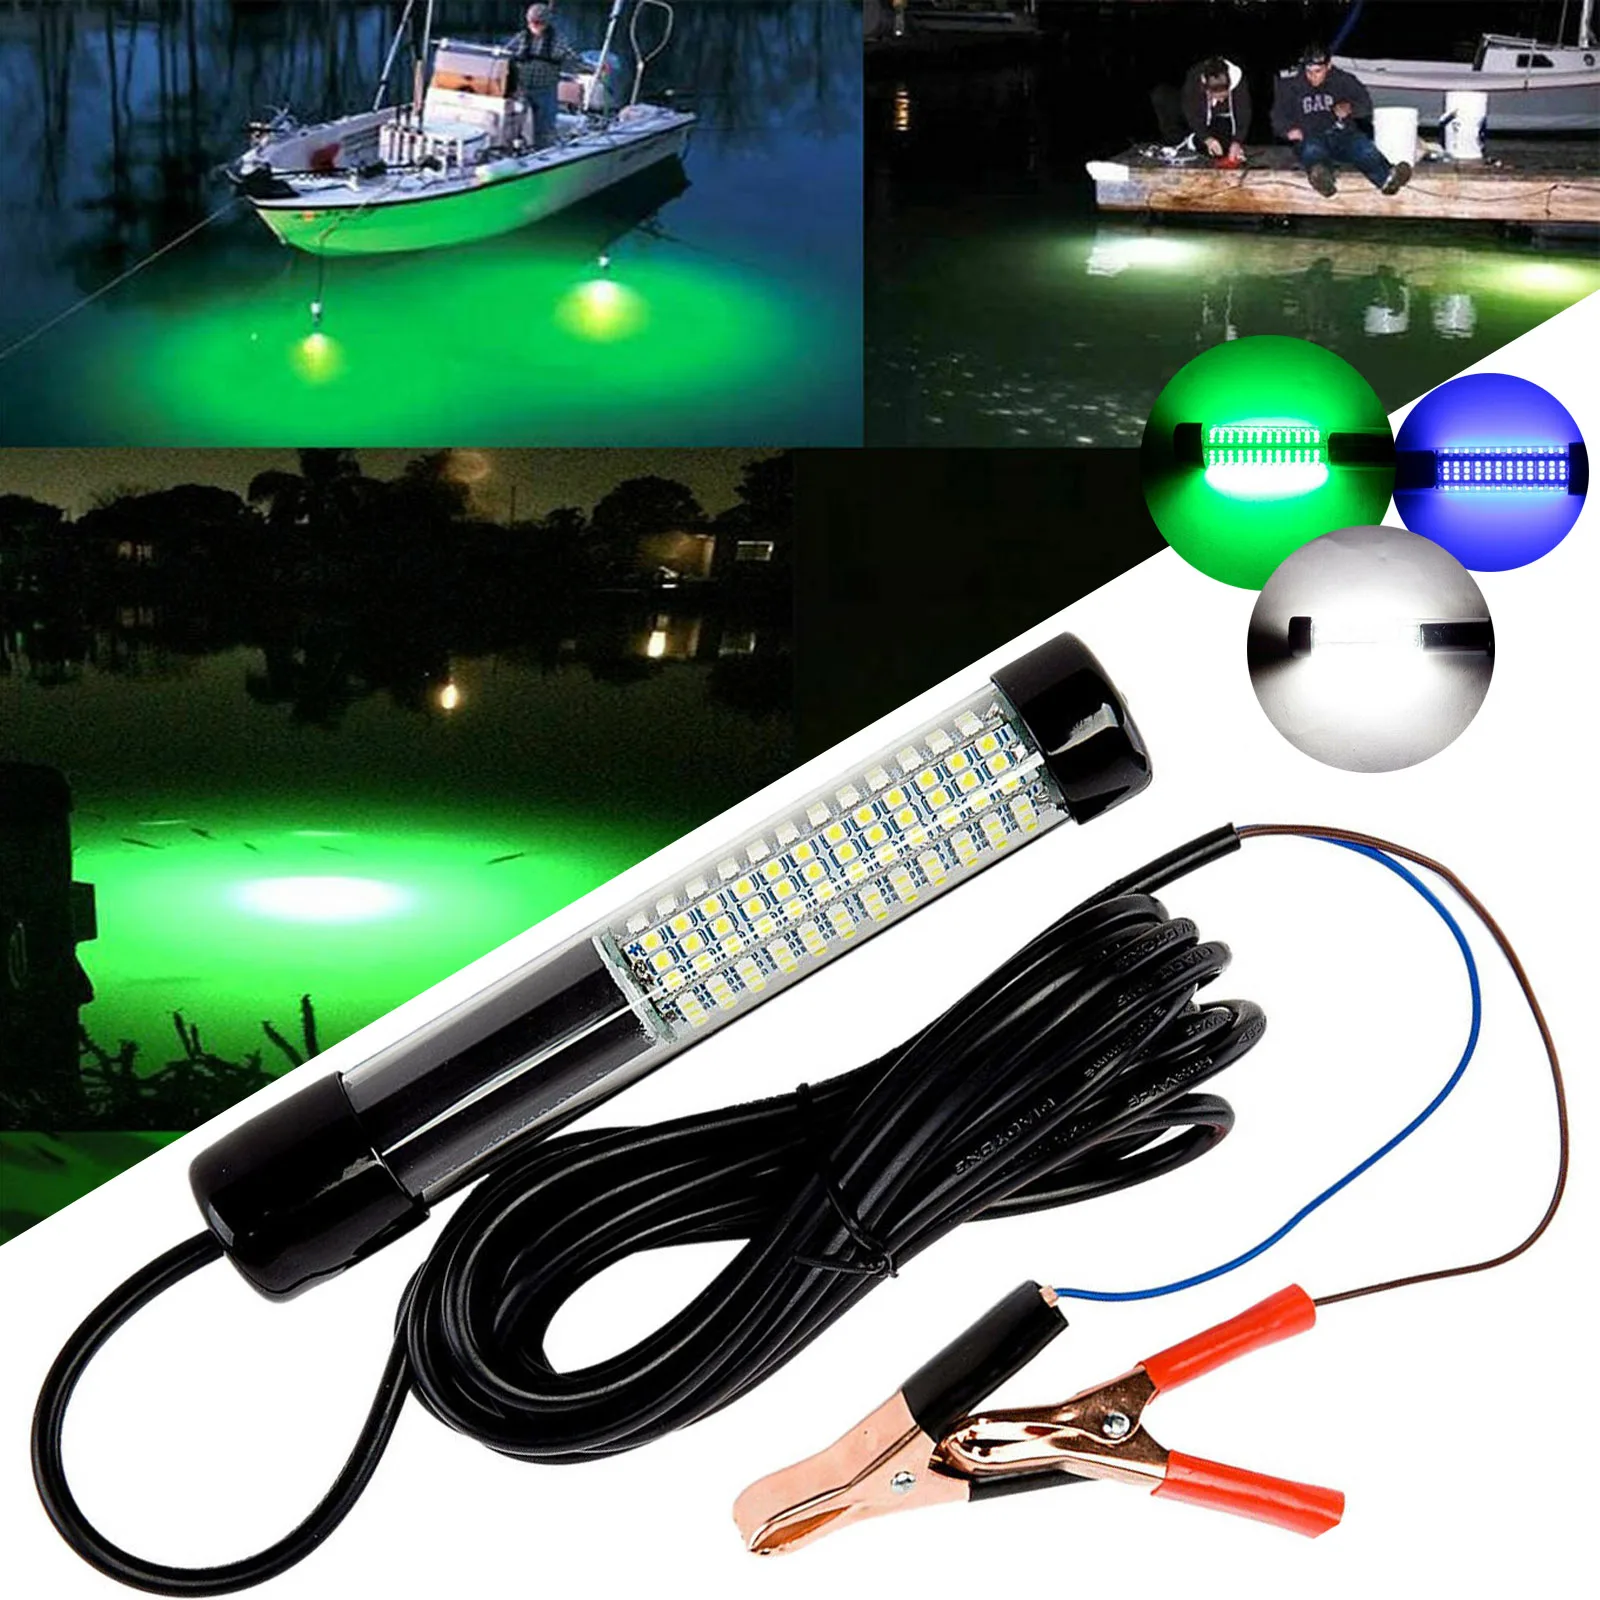 

180LEDs Waterproof 1300lm 12V LED Submersible Fishing Night Light Underwater Fish Lure Bait Finder Lamp Blue Green Lights